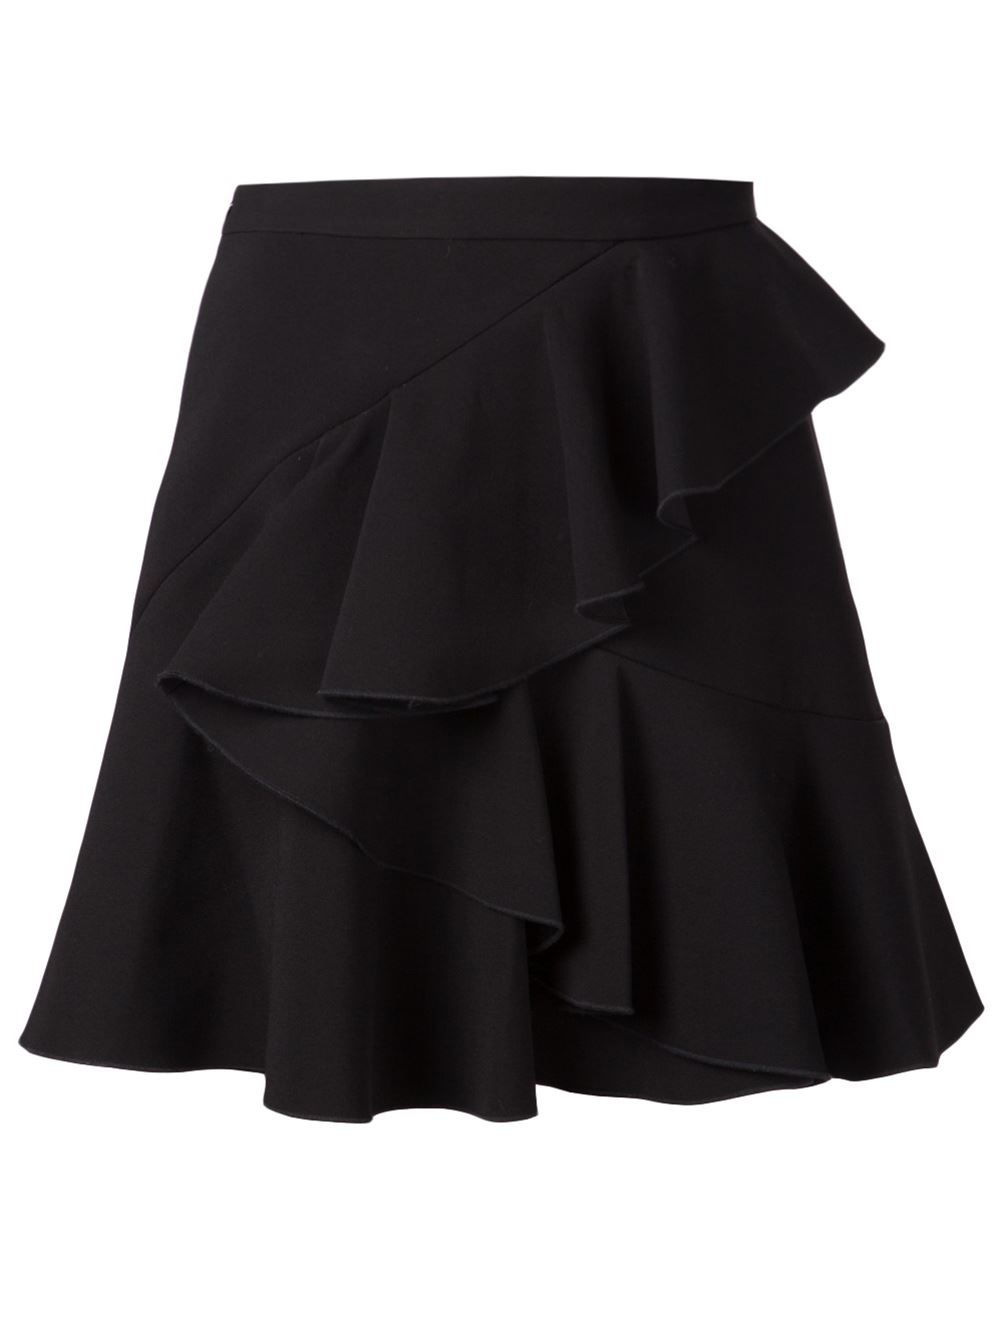 Co. Layered Ruffle Skirt in Black | Lyst